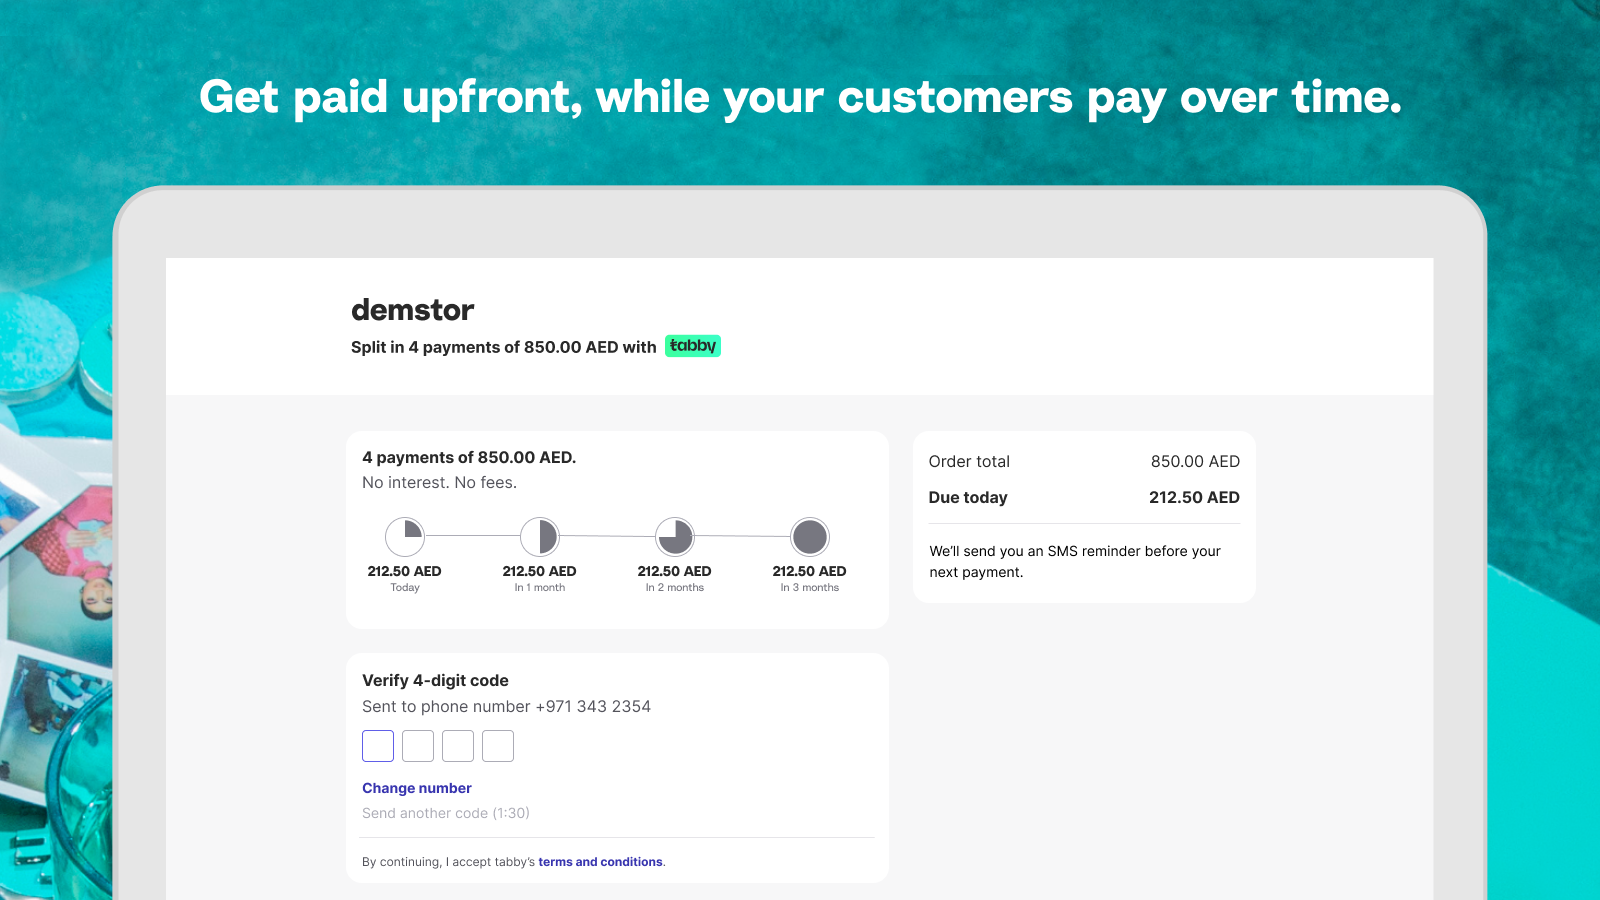 Get paid upfront, while your customers pay over time.